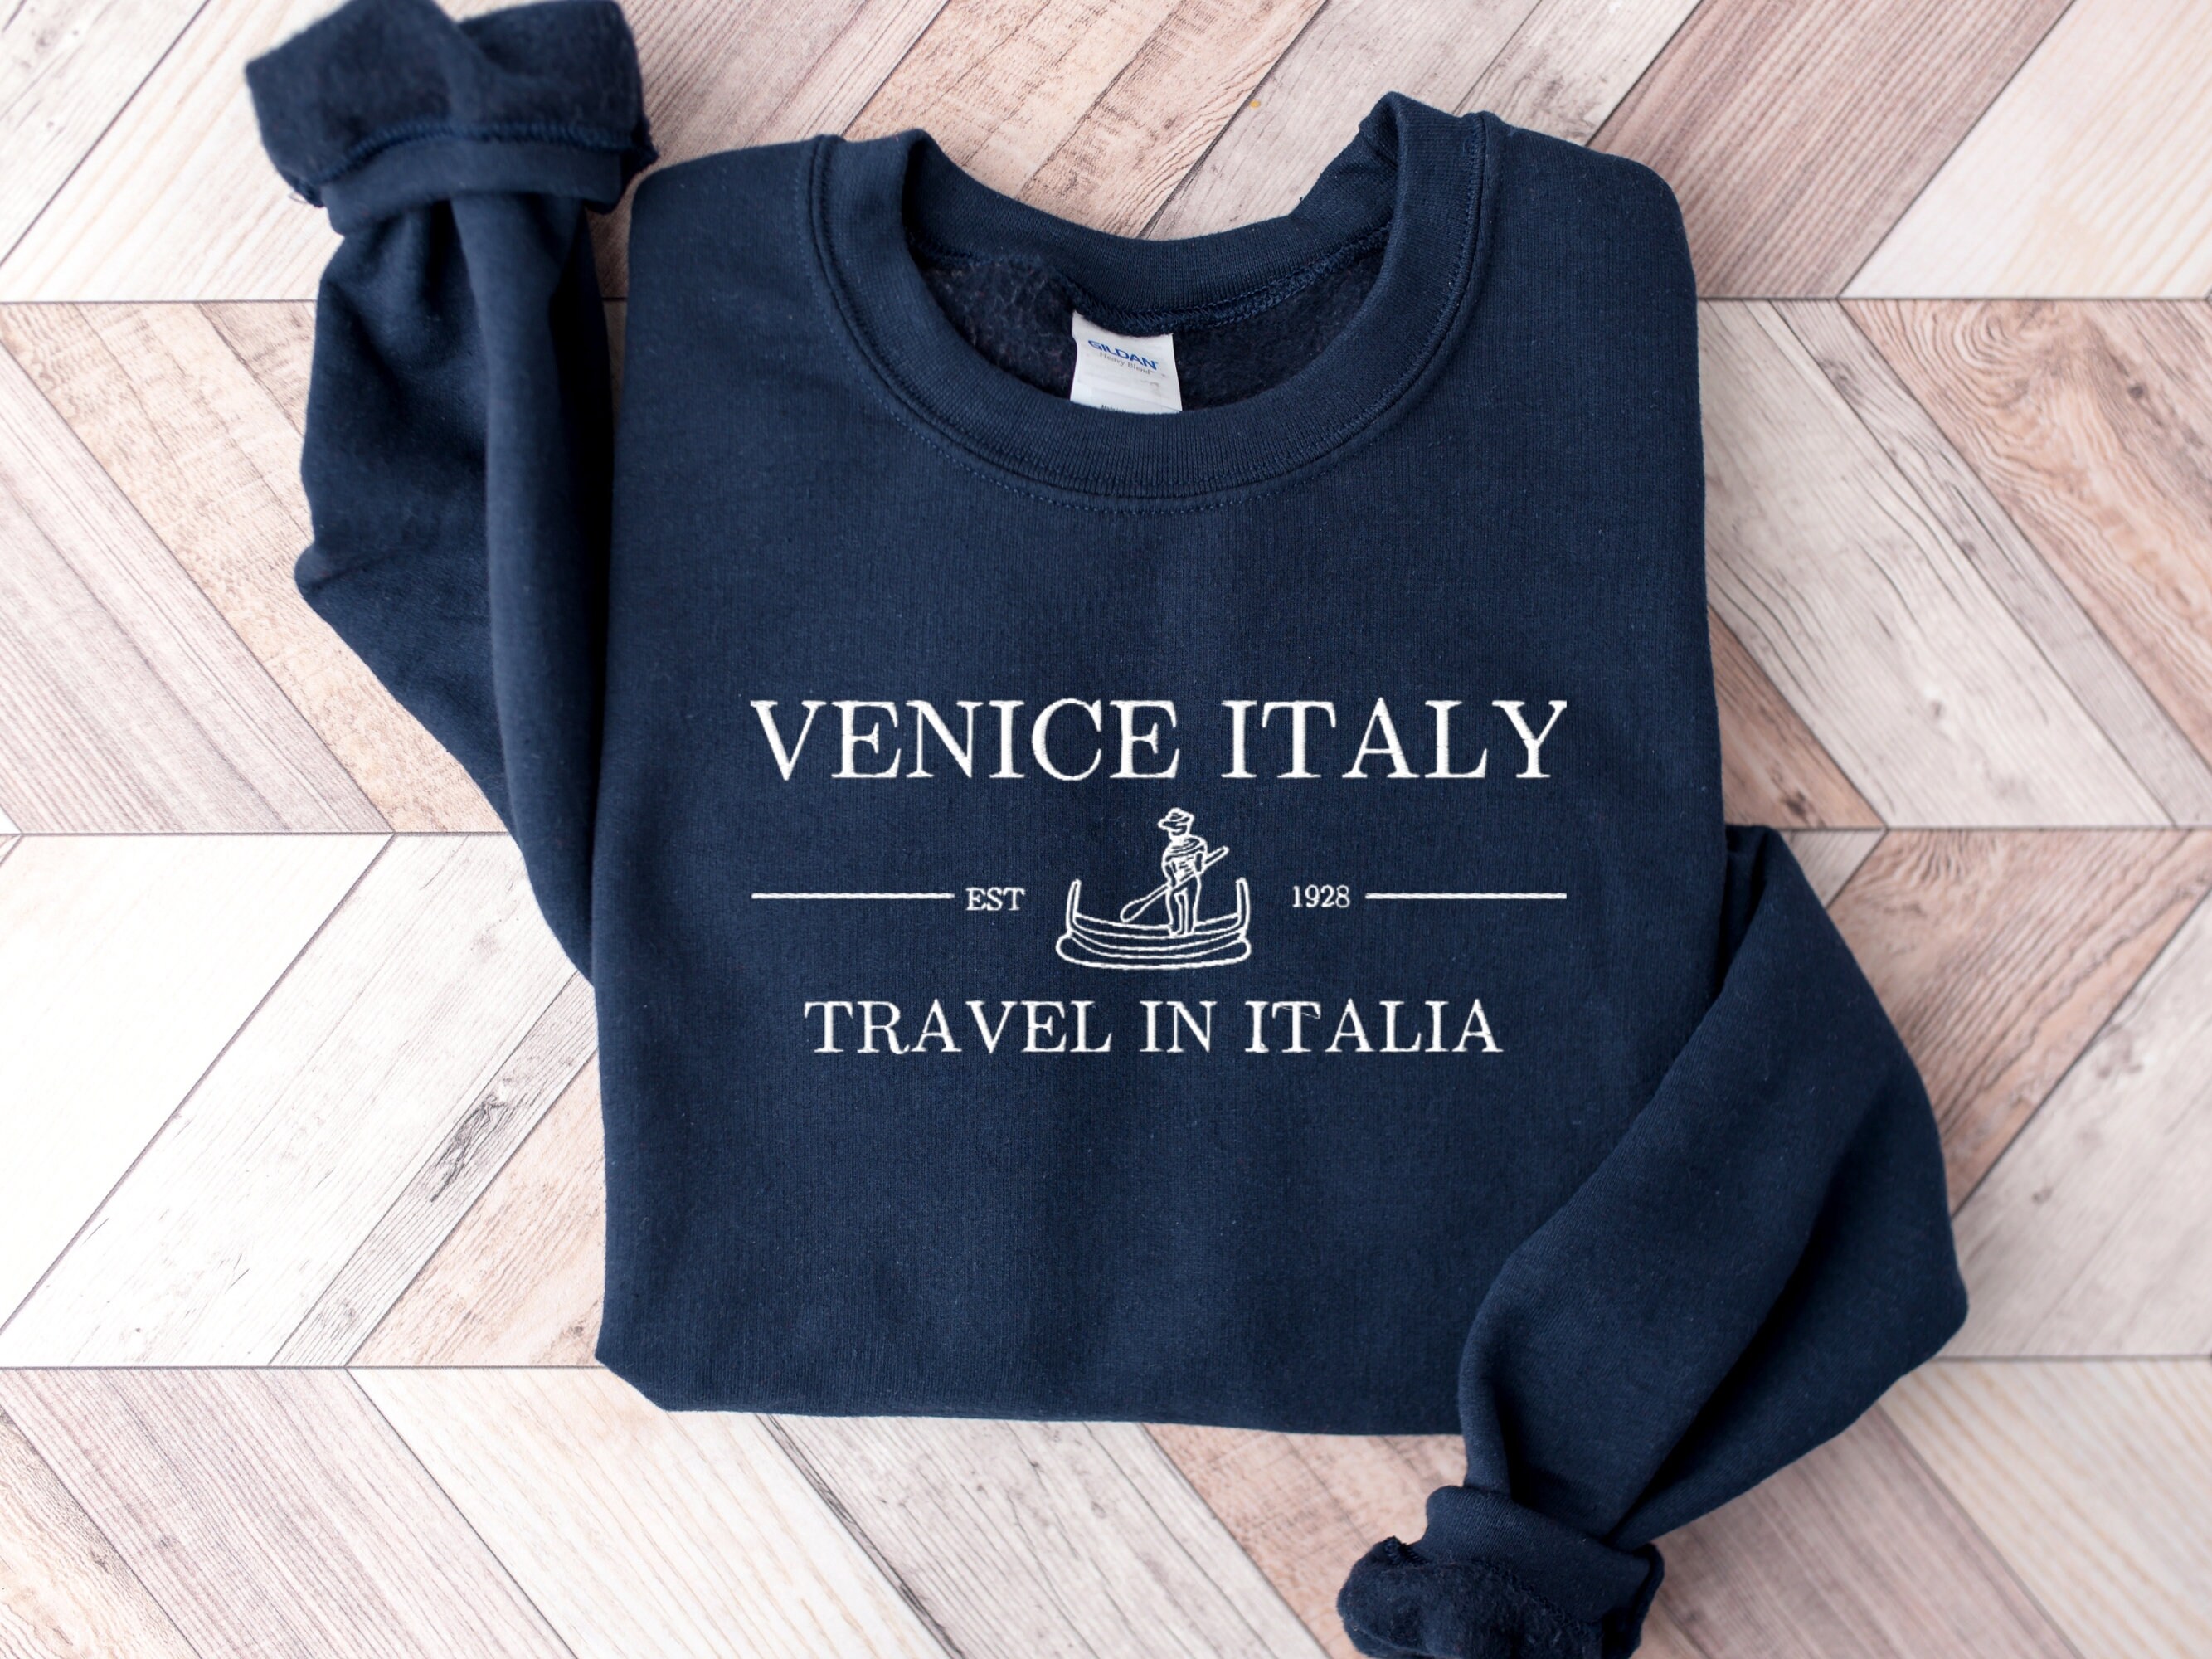 Custom Embroidery VENICE OF ITALY Embroidered Crewneck Sweatshirt Pick Color